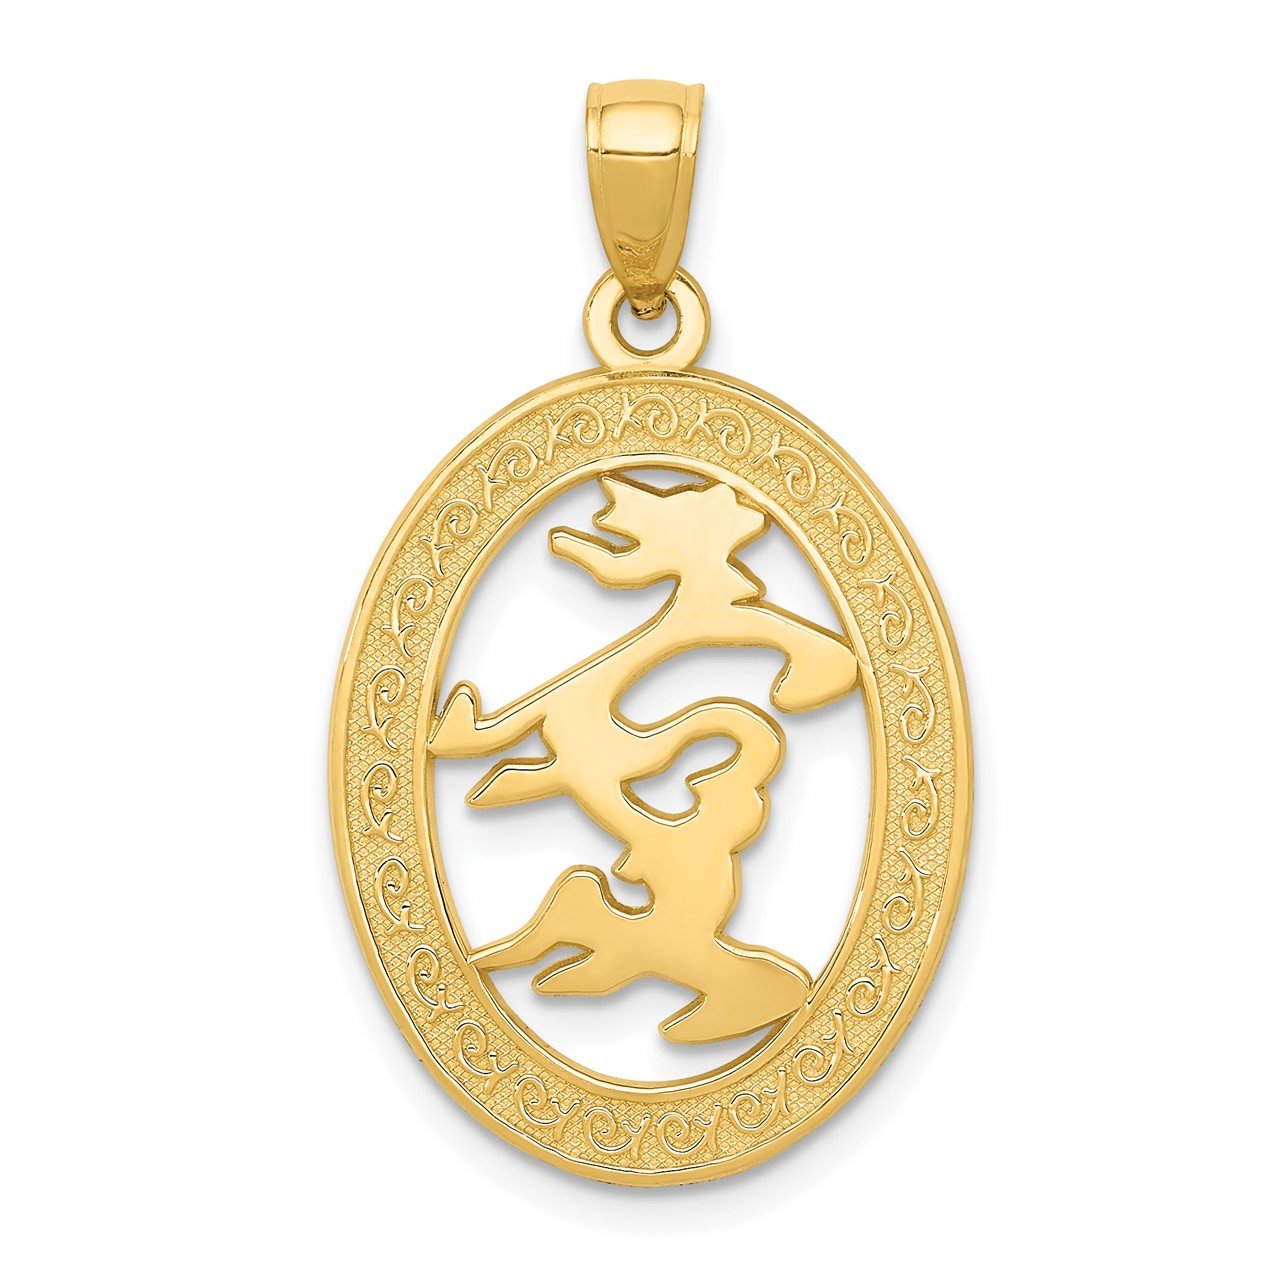 14k Chinese Happiness Symbol in Oval Frame Pendant